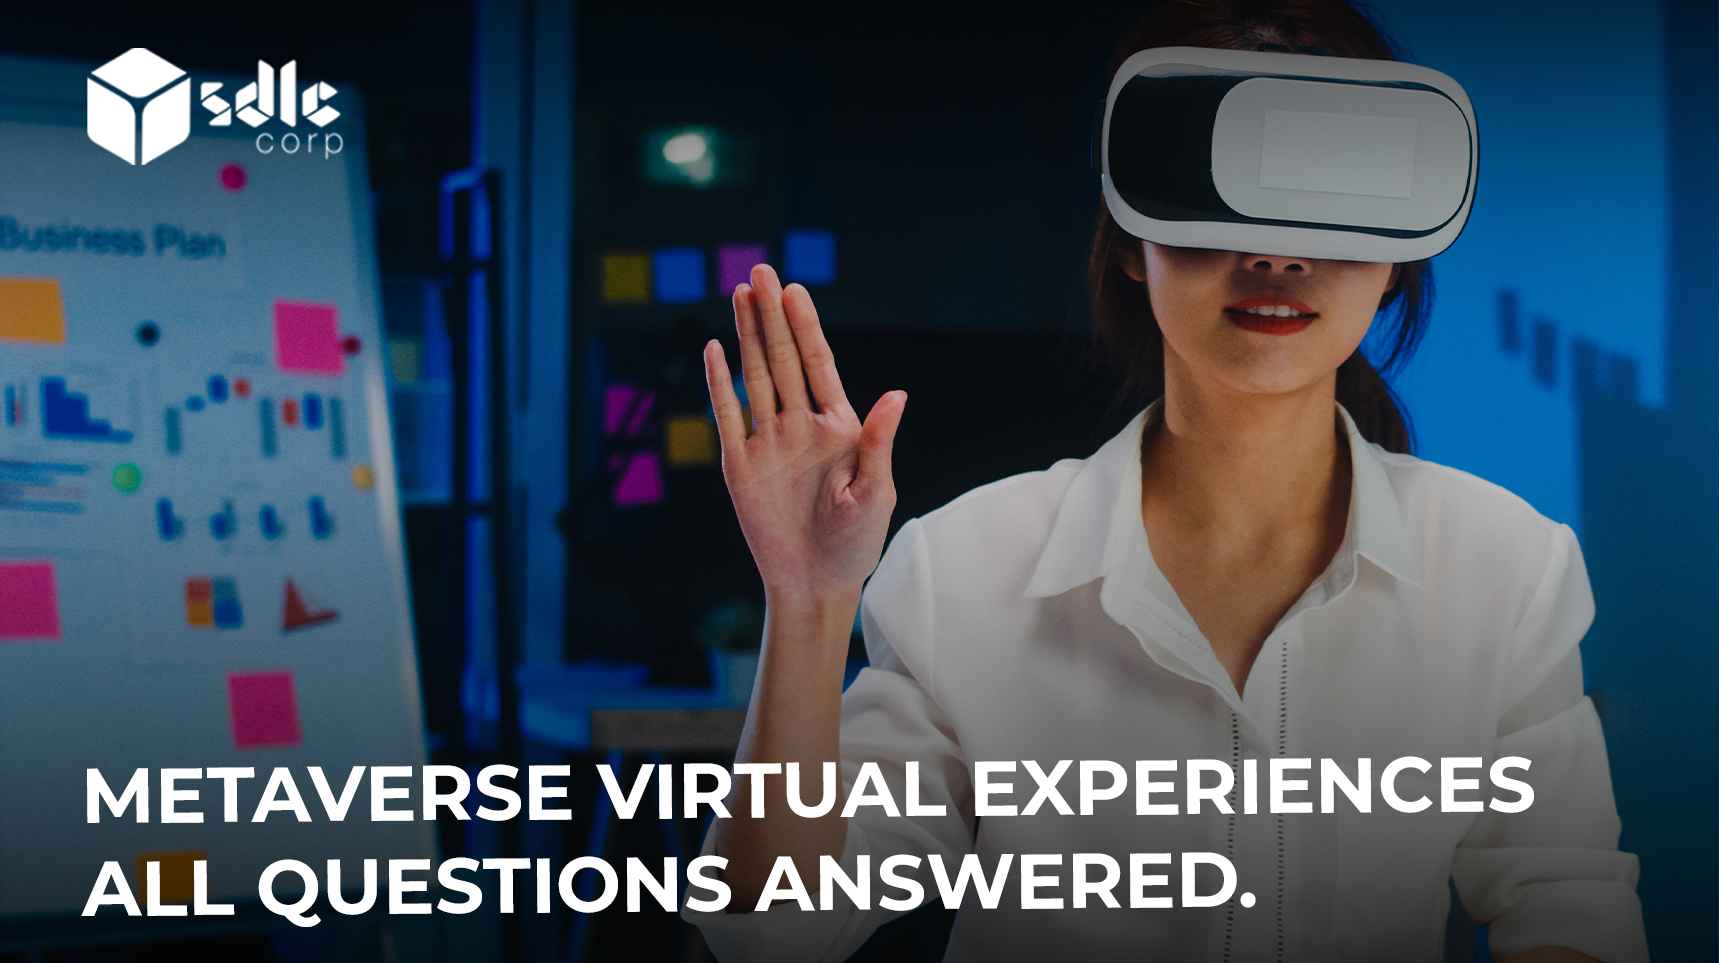 Metaverse Virtual Experience All Questions Answered - SDLC Corp